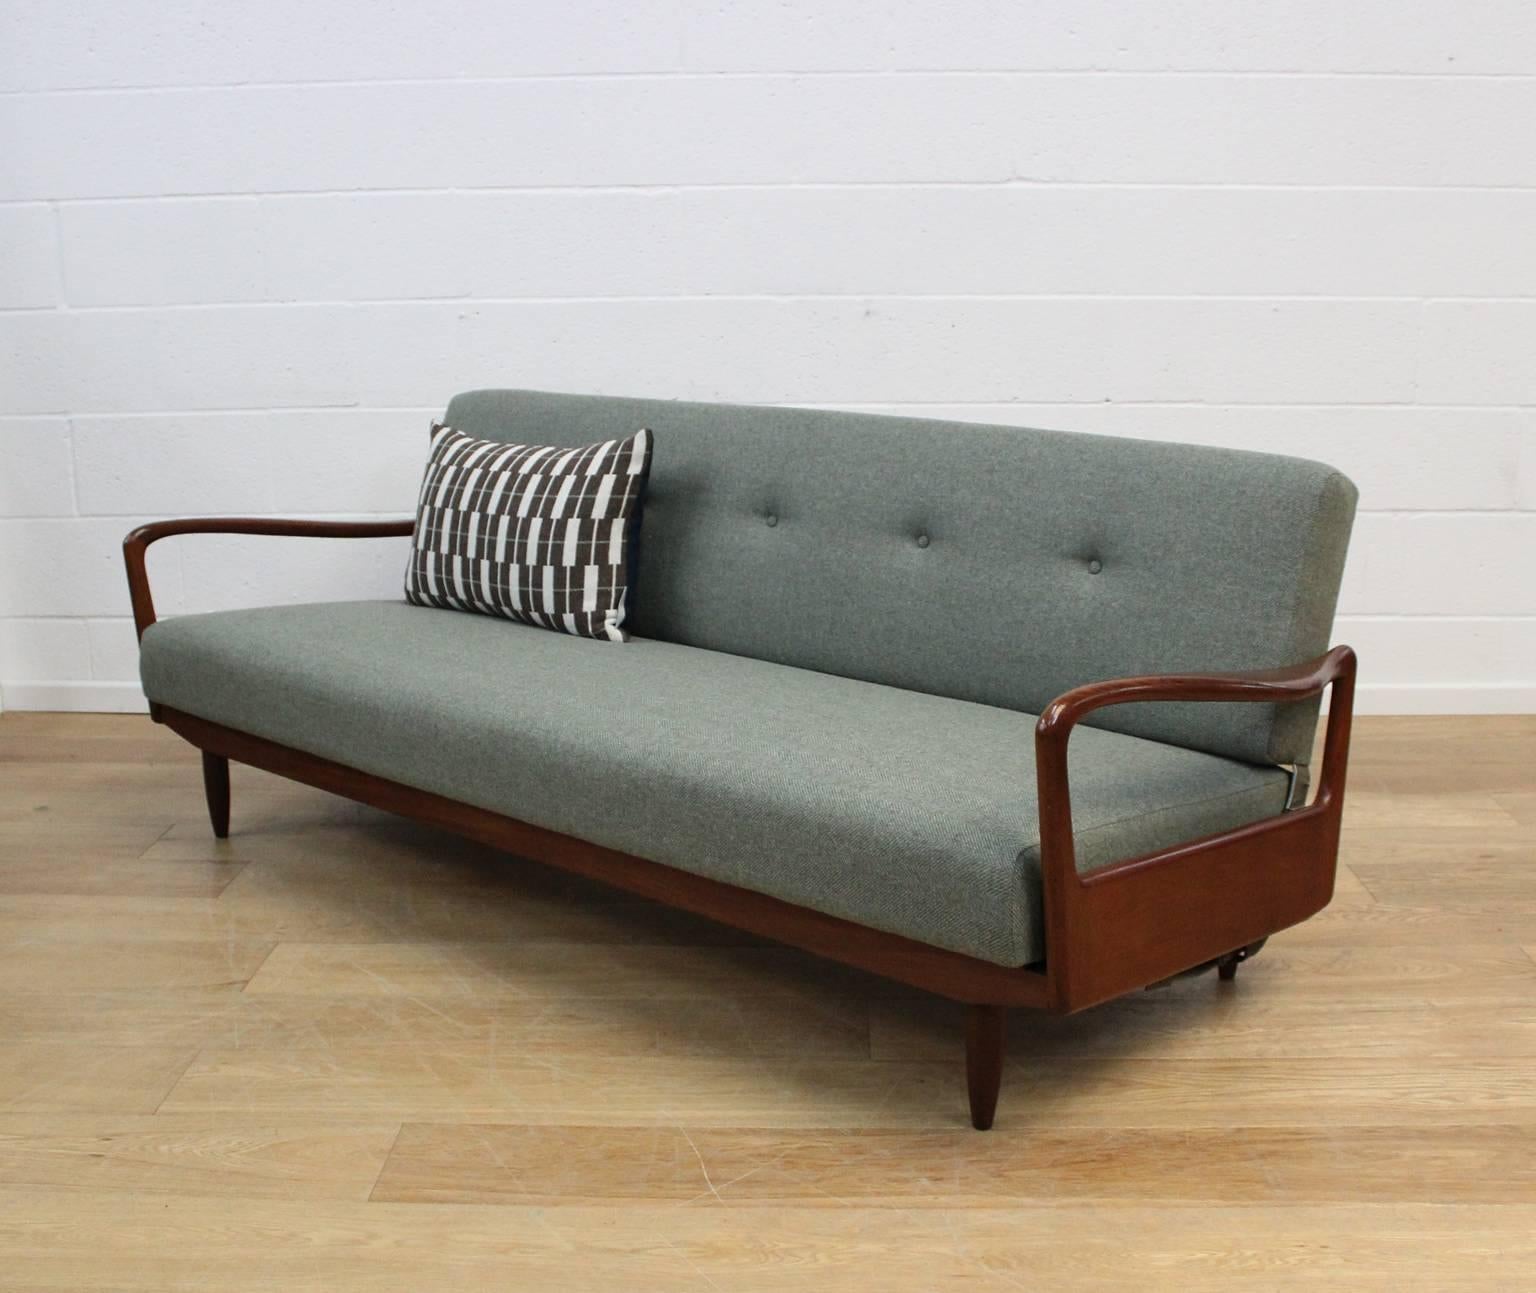 Greaves & Thomas Midcentury Sofa Bed with Teak Arms, Fully Restored in Wool In Excellent Condition In Haverhill, Suffolk